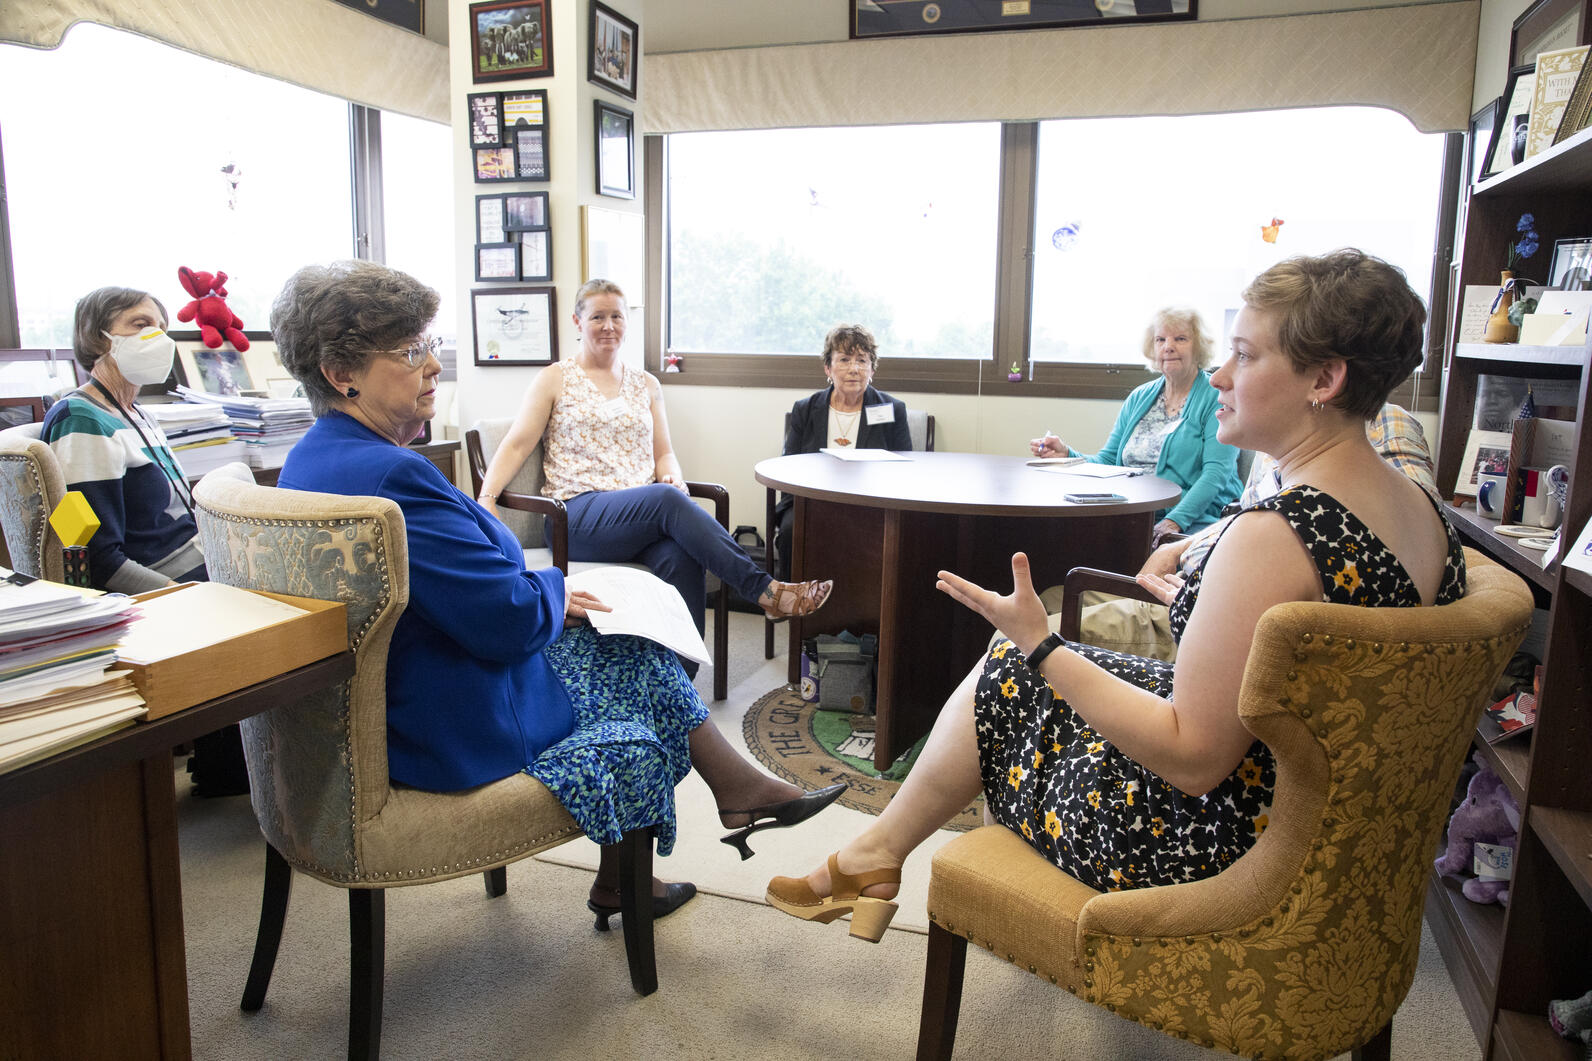 Audubon members meet with a lawmaker in her office.